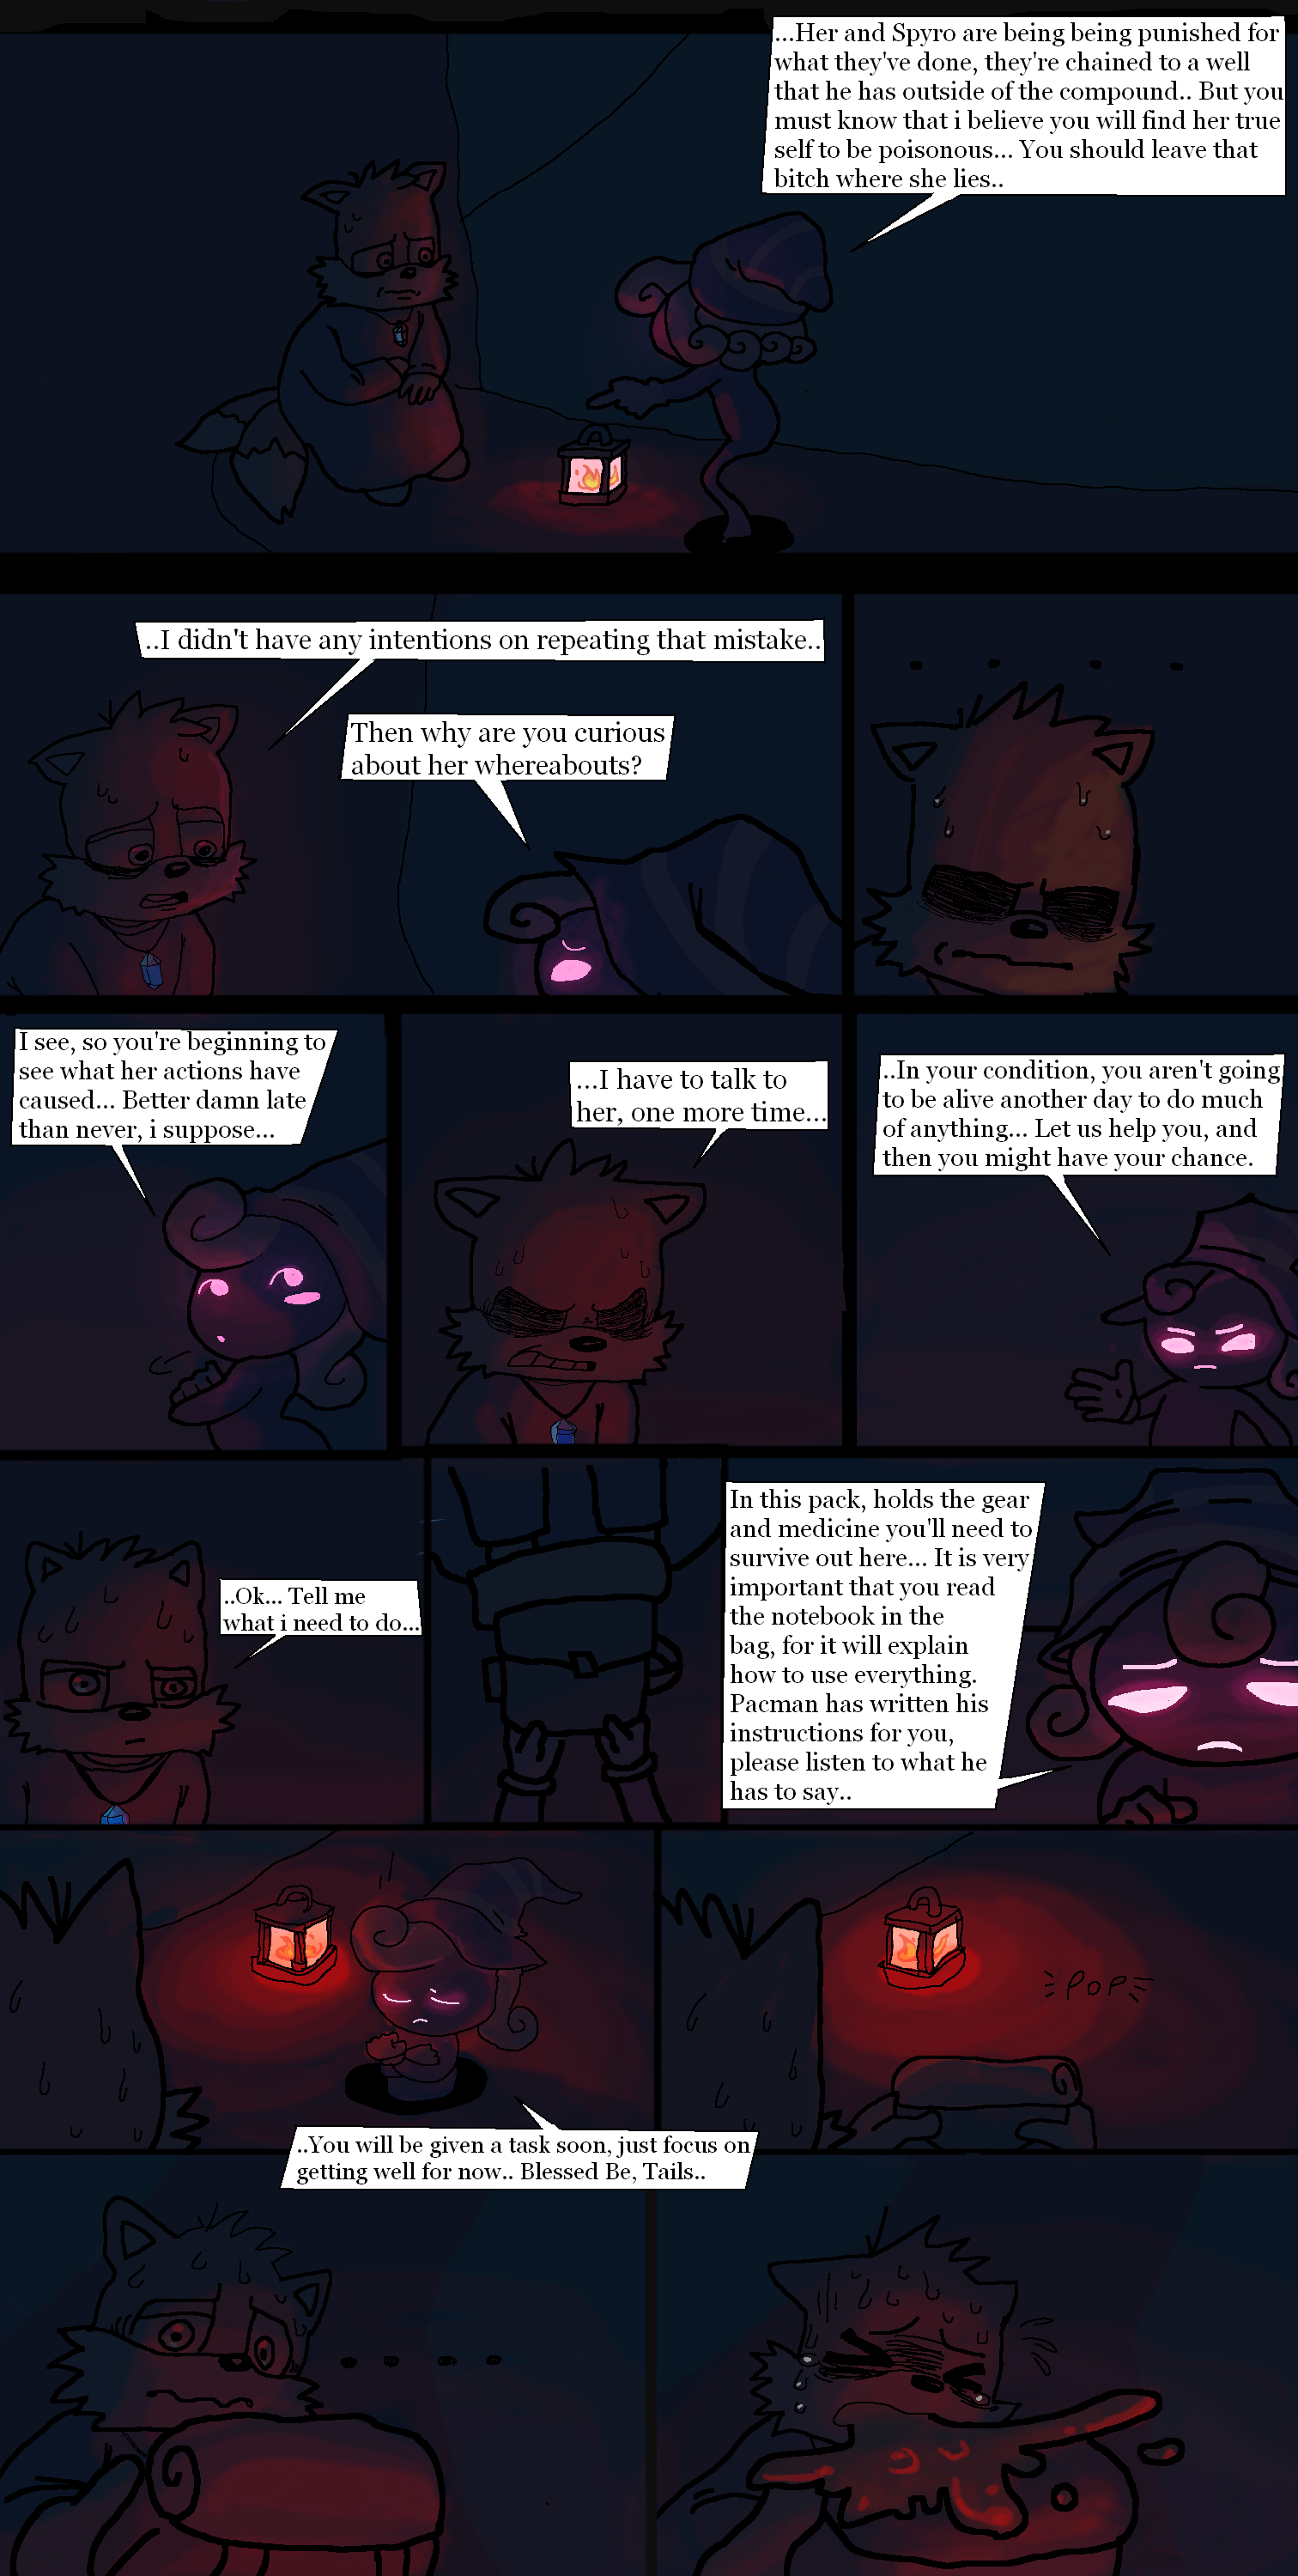 ch25.5/pg15.png. If you're seeing this, enable images. Or, perhaps we have a website issue. Try refreshing, if unsuccessful email c@commodorian.org with a detailed description of how you got here.